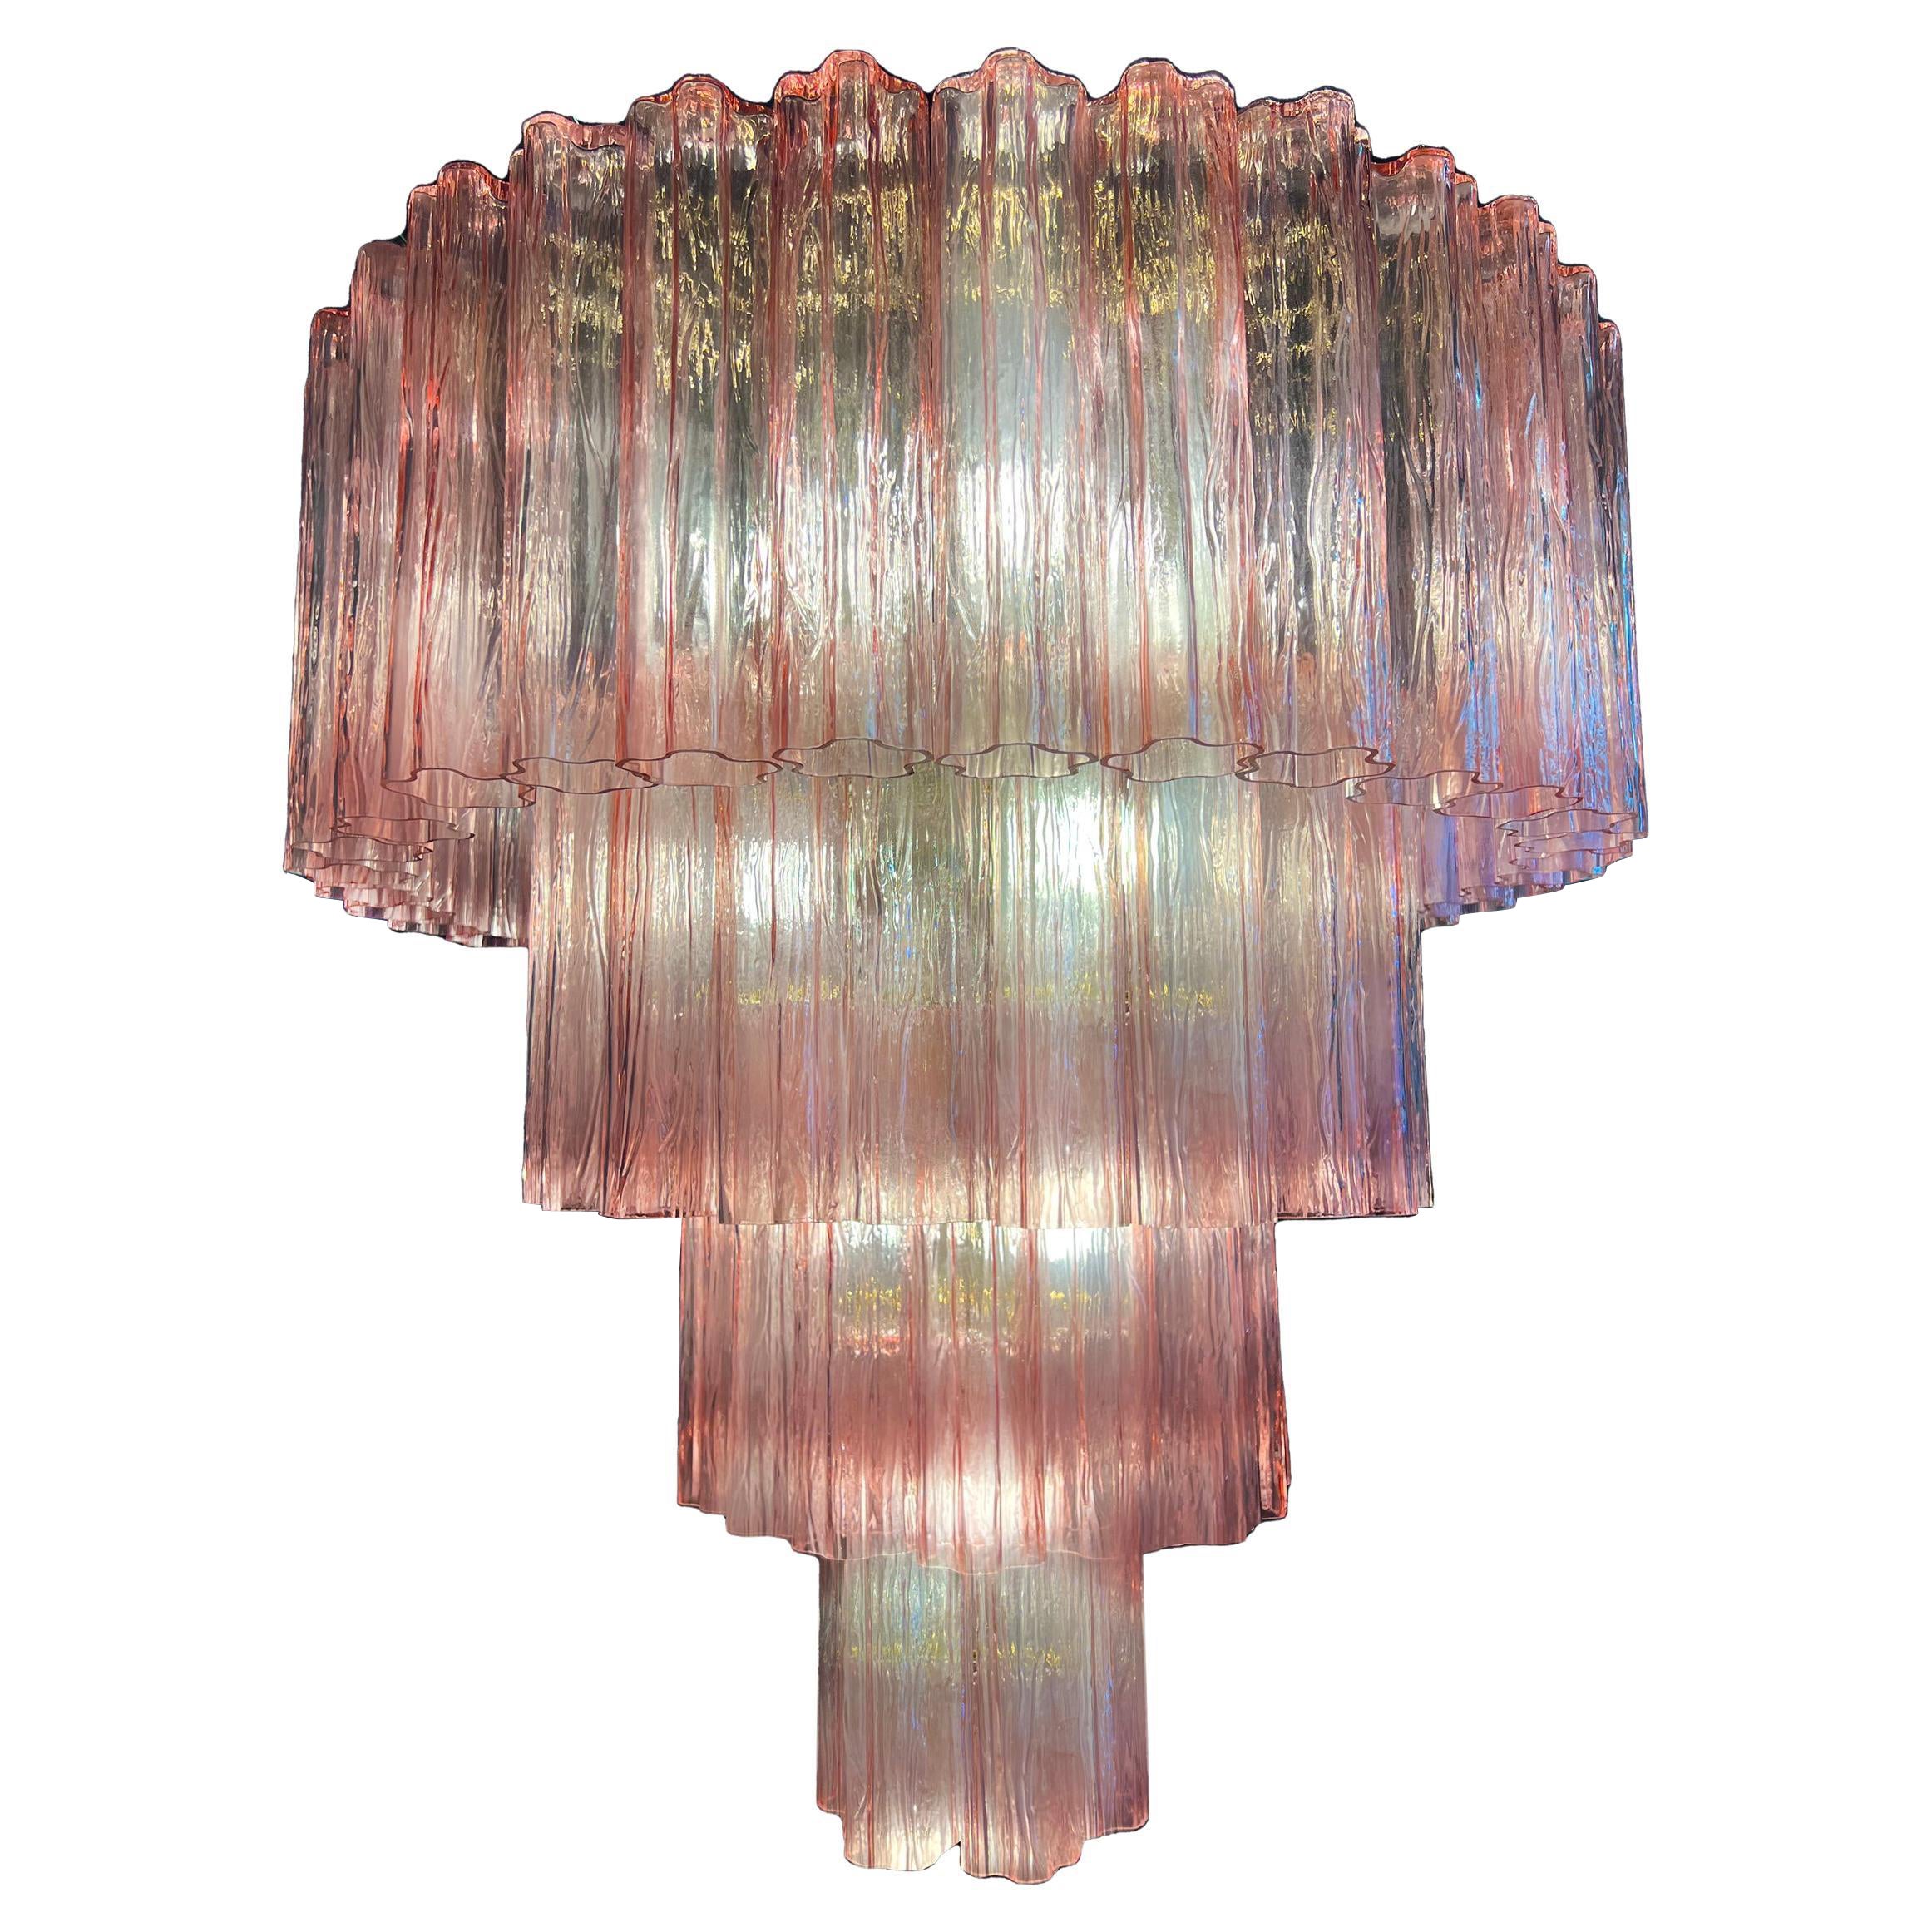 Stunning Murano chandeliers. The sophisticated pink color elegantly reflects the light. The height without chain is 112 cm. It can be made to the dimensions requested by the customer.